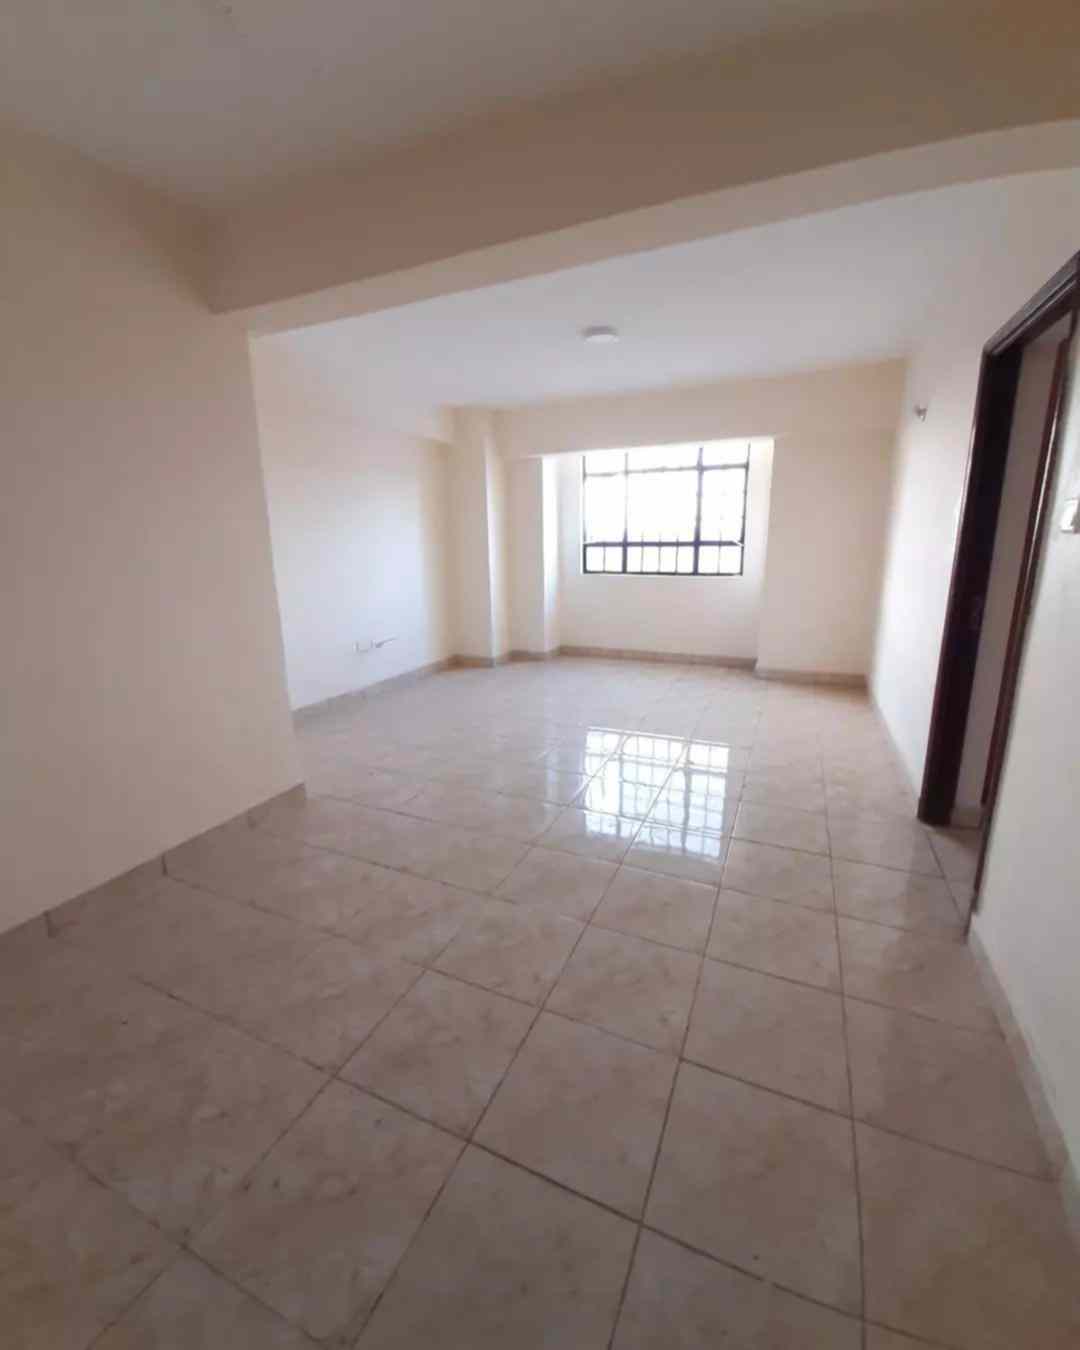 2 bedroom apartment for rent in Ngong rd Kilimani